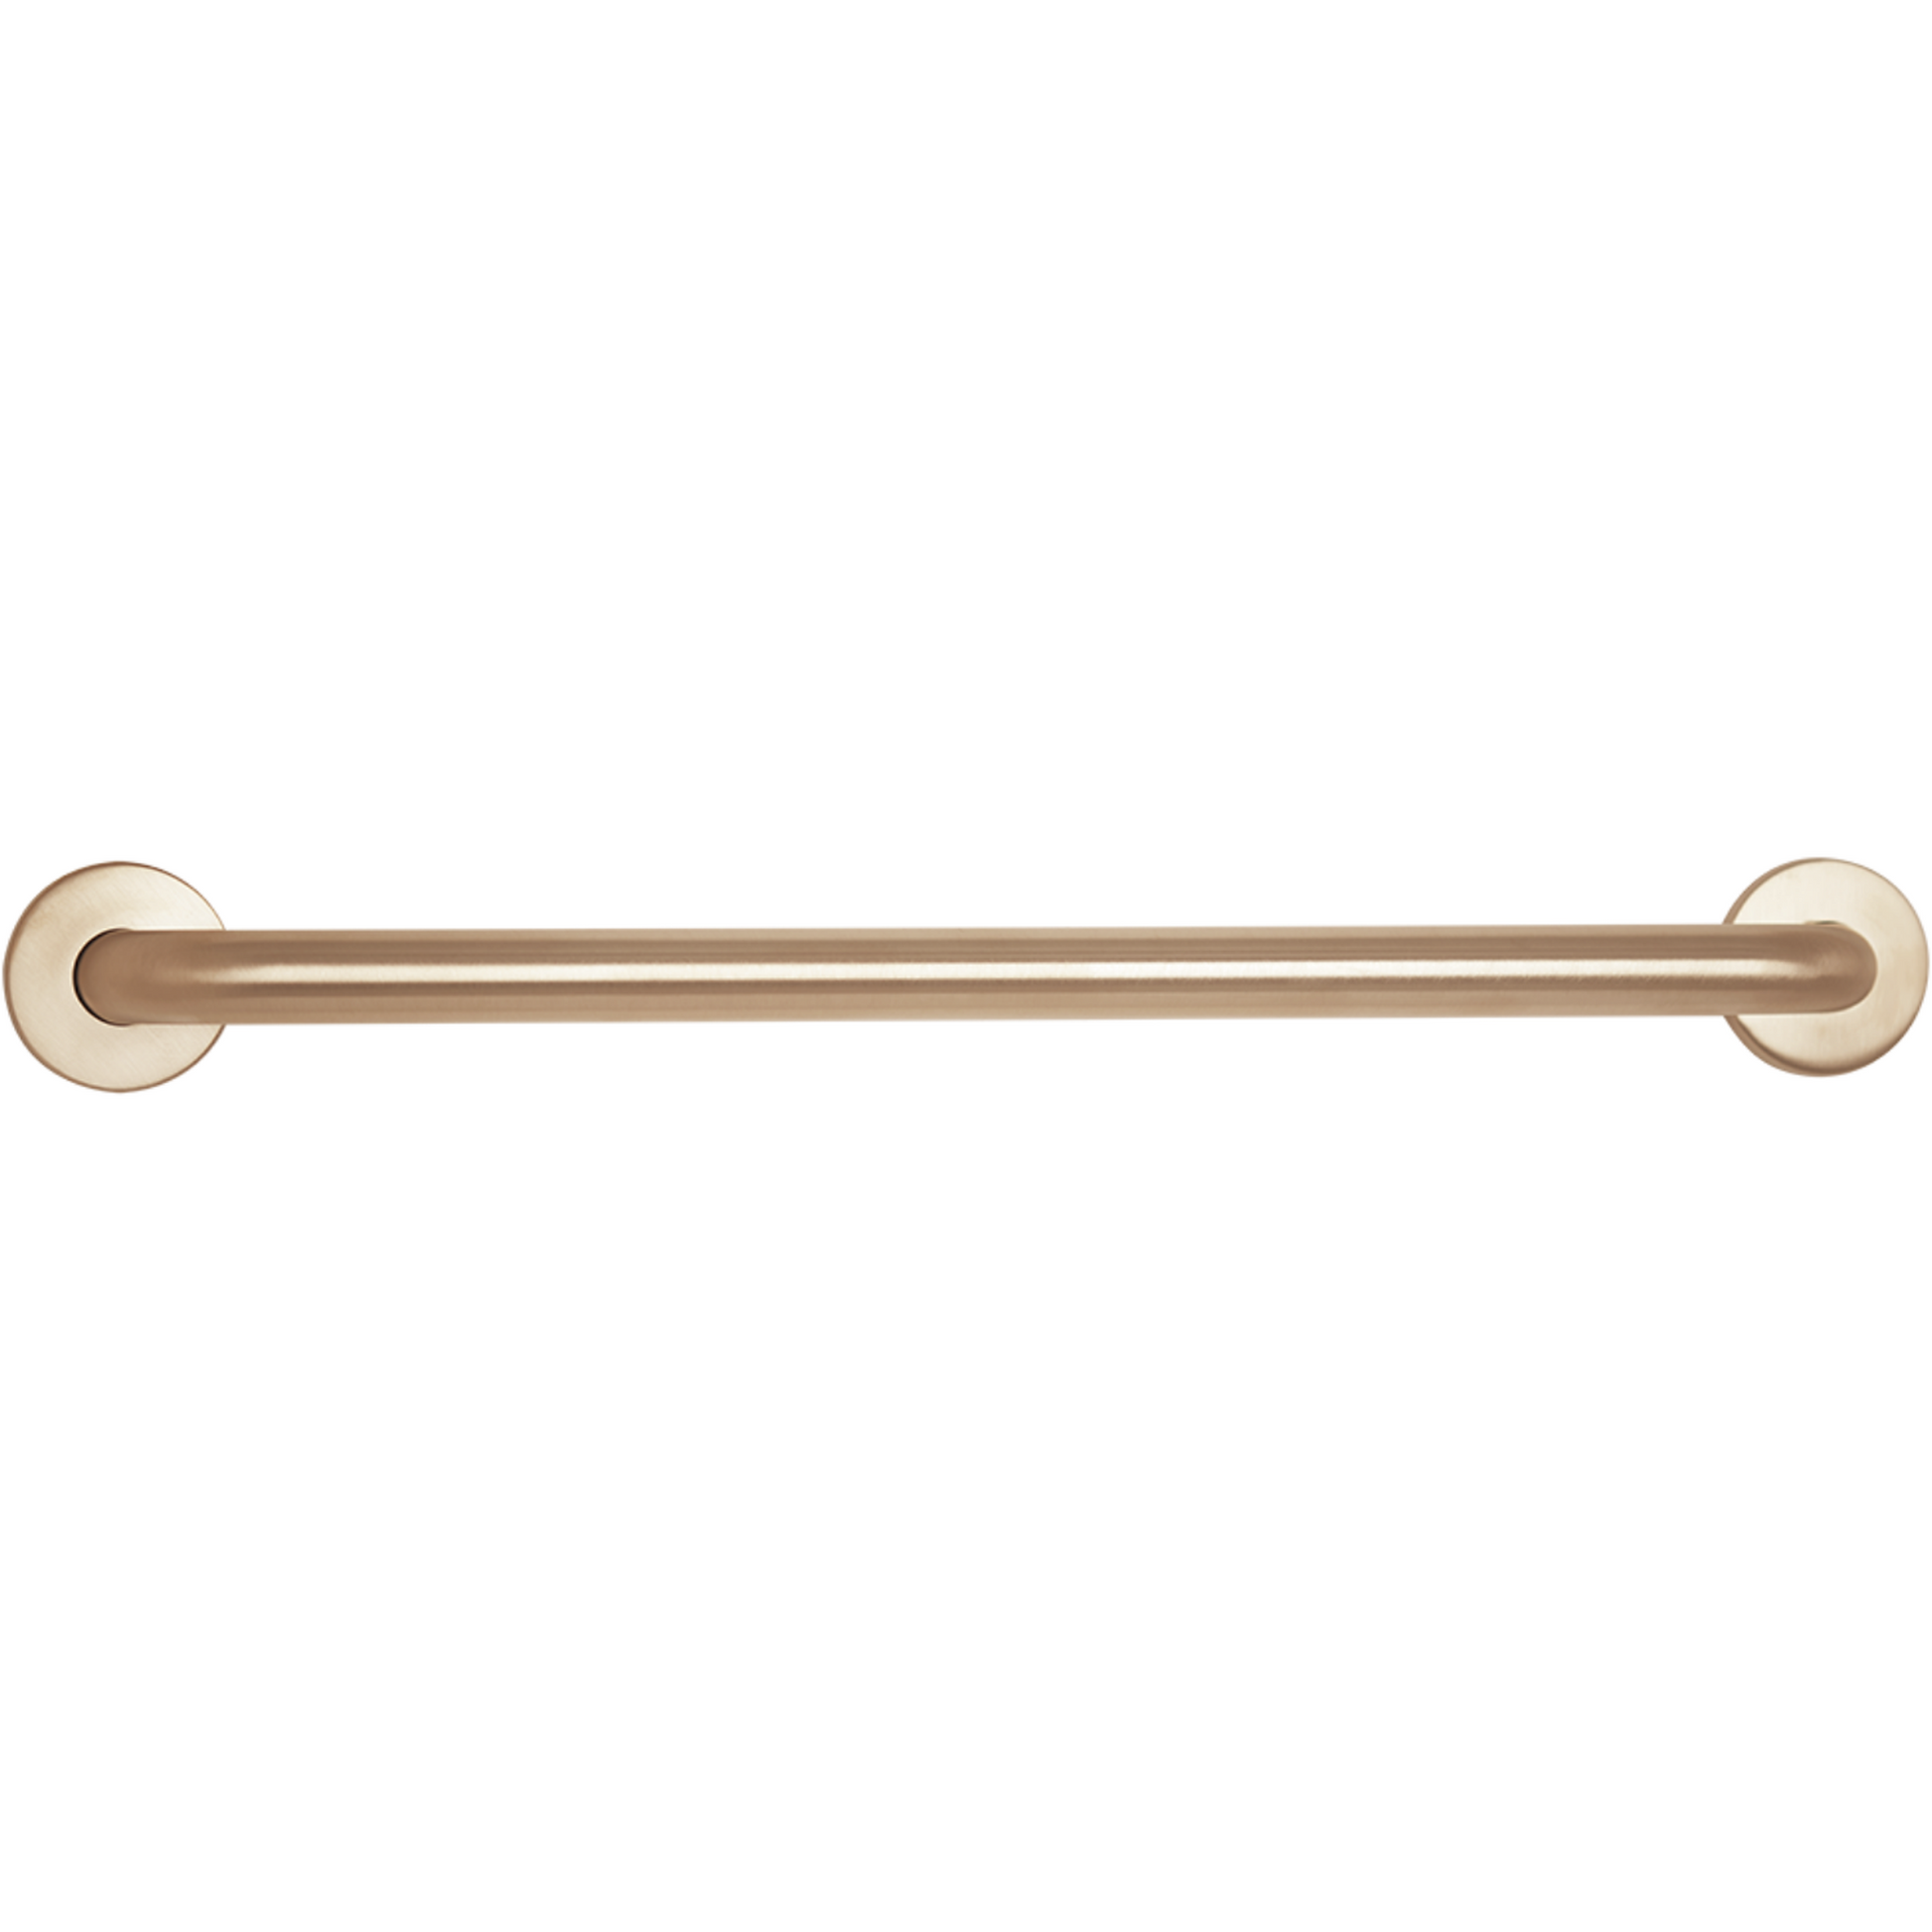 Seachrome Signature Series CuVerro 30" Antimicrobial Copper Alloy 1.5" Bar Diameter Concealed Flange Straight Grab Bar